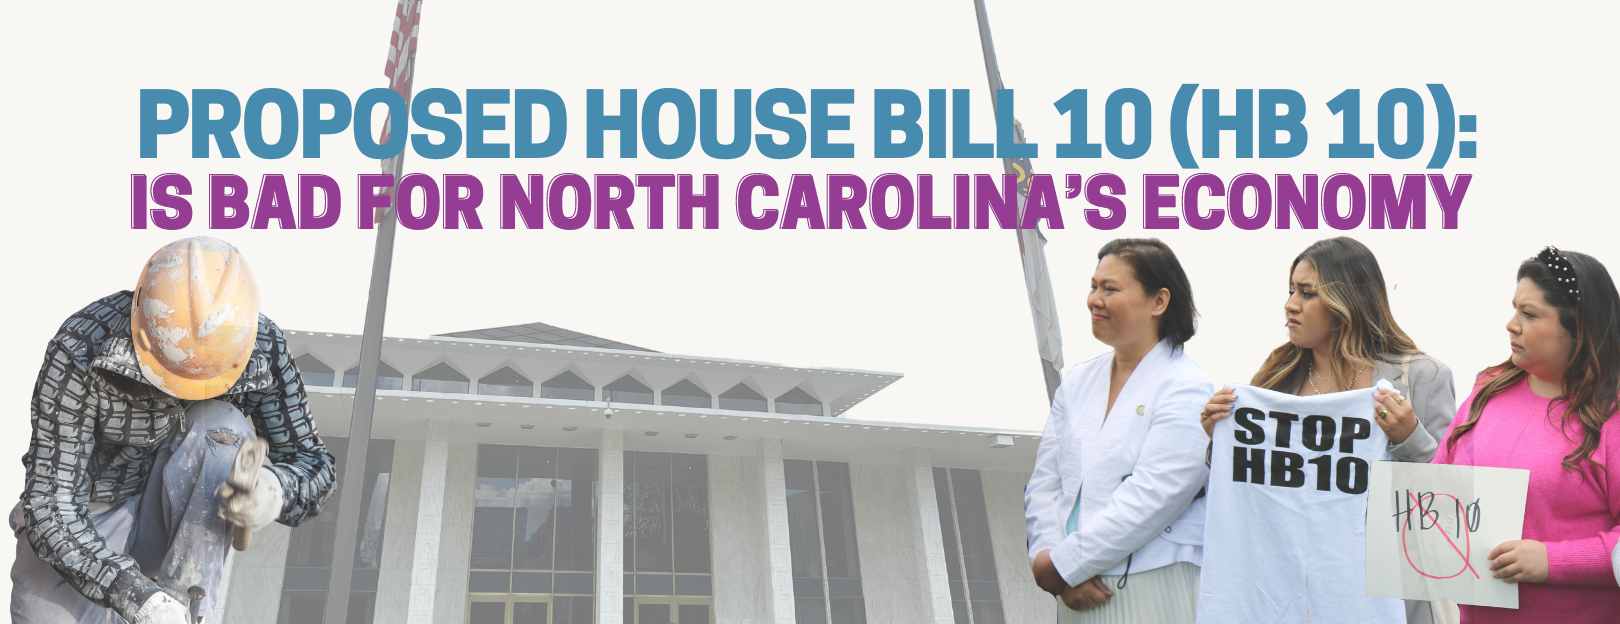 You are currently viewing Proposed House Bill 10 (HB 10)